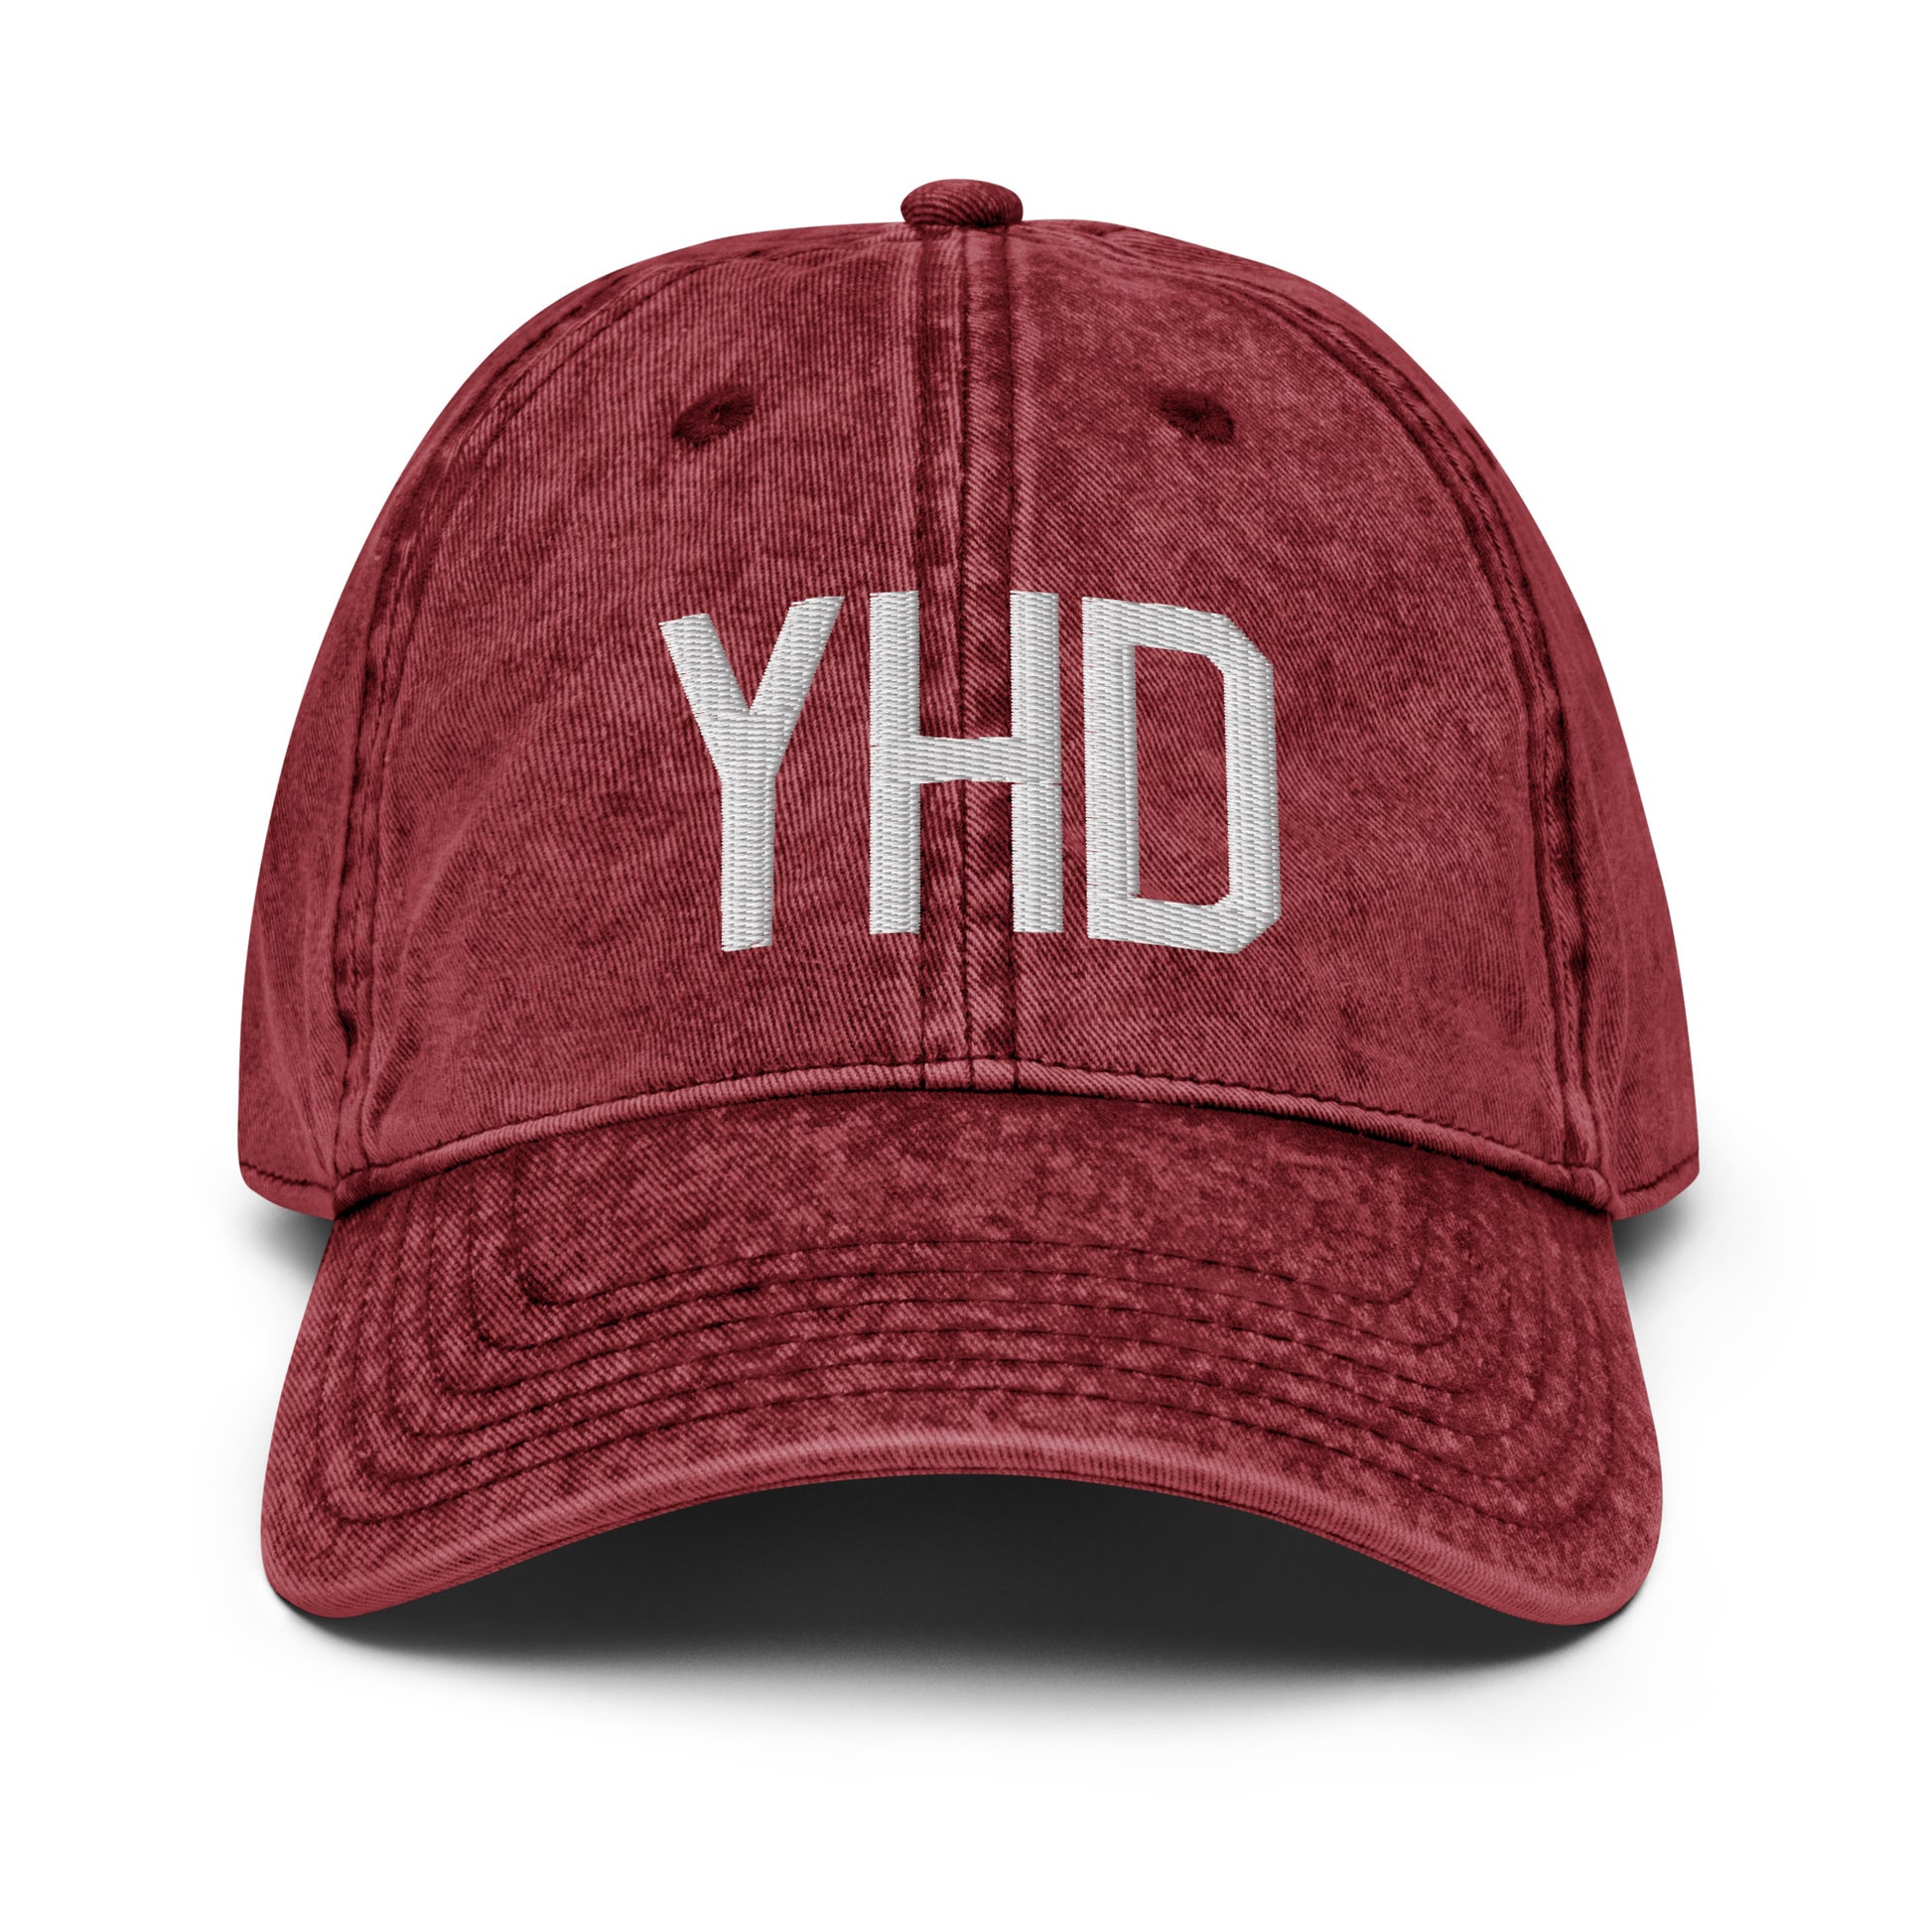 Airport Code Twill Cap - White • YHD Dryden • YHM Designs - Image 19